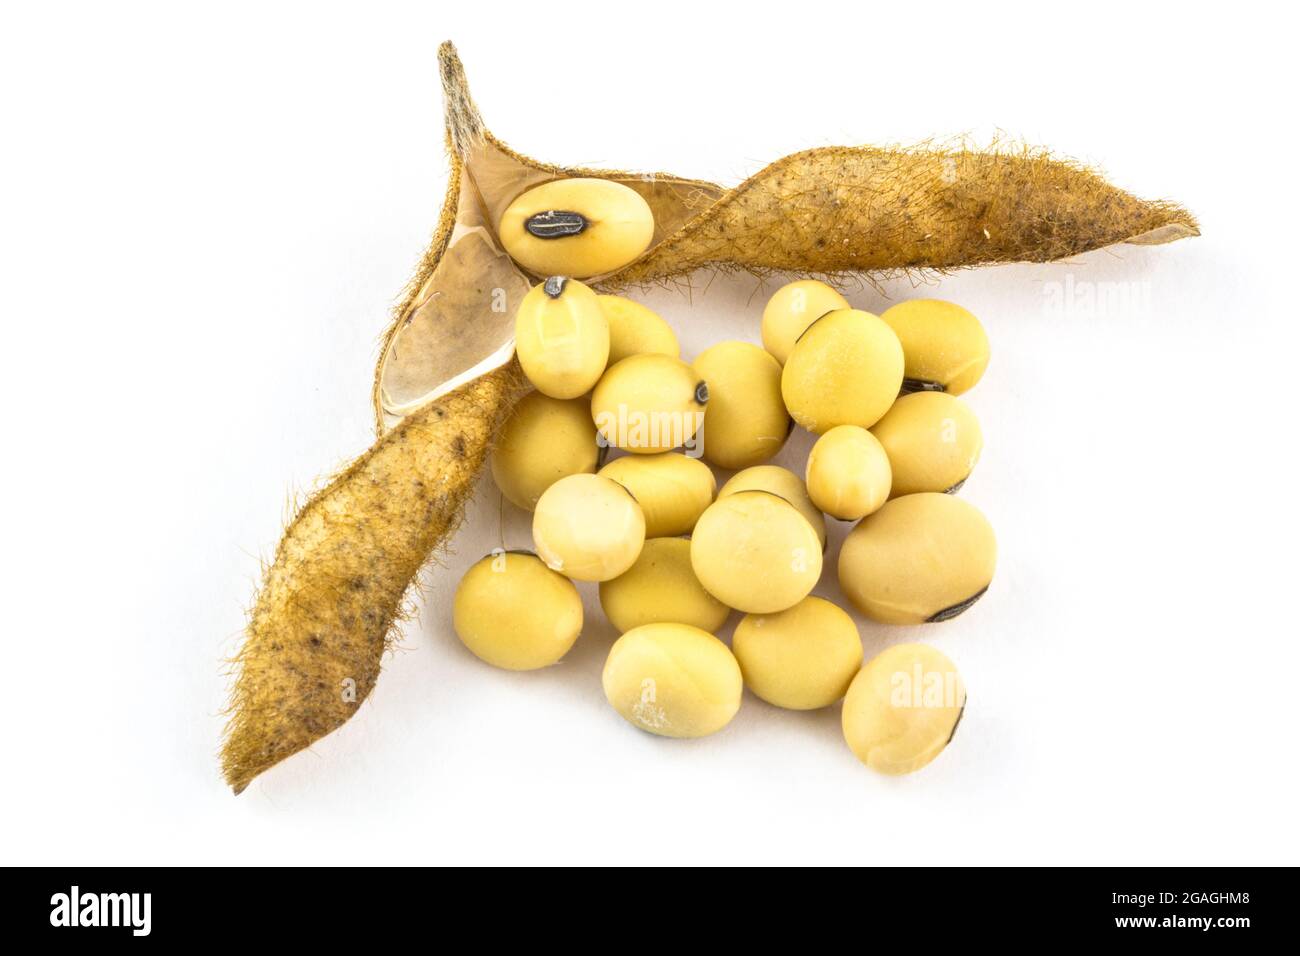 Soybean field Cut Out Stock Images & Pictures - Alamy